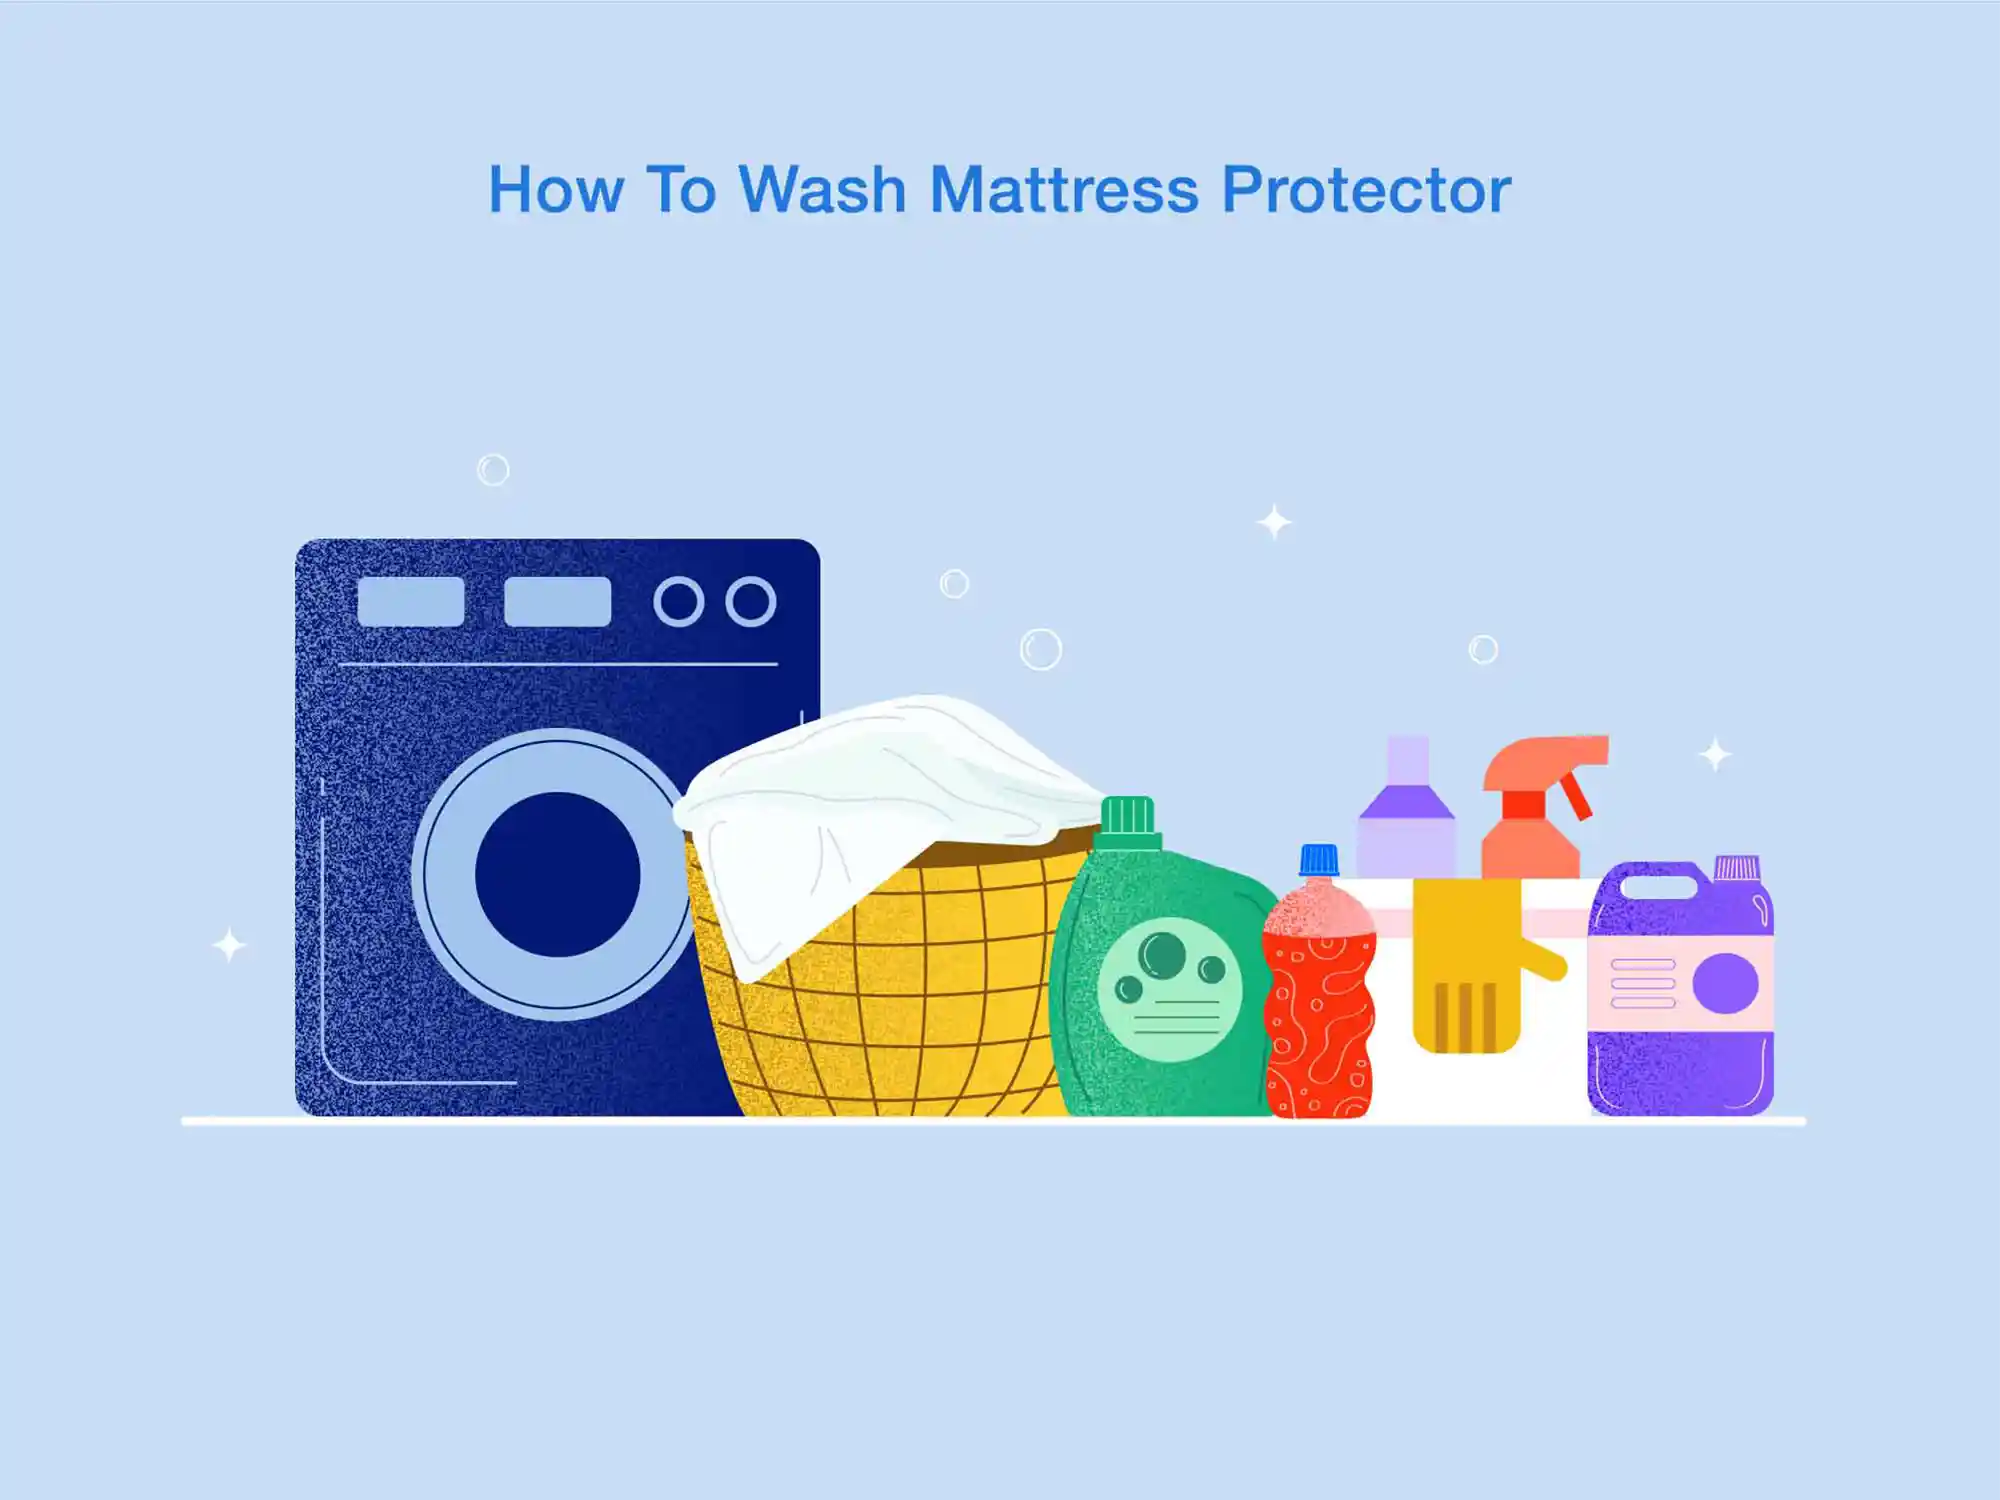 How to Wash a Mattress Protector